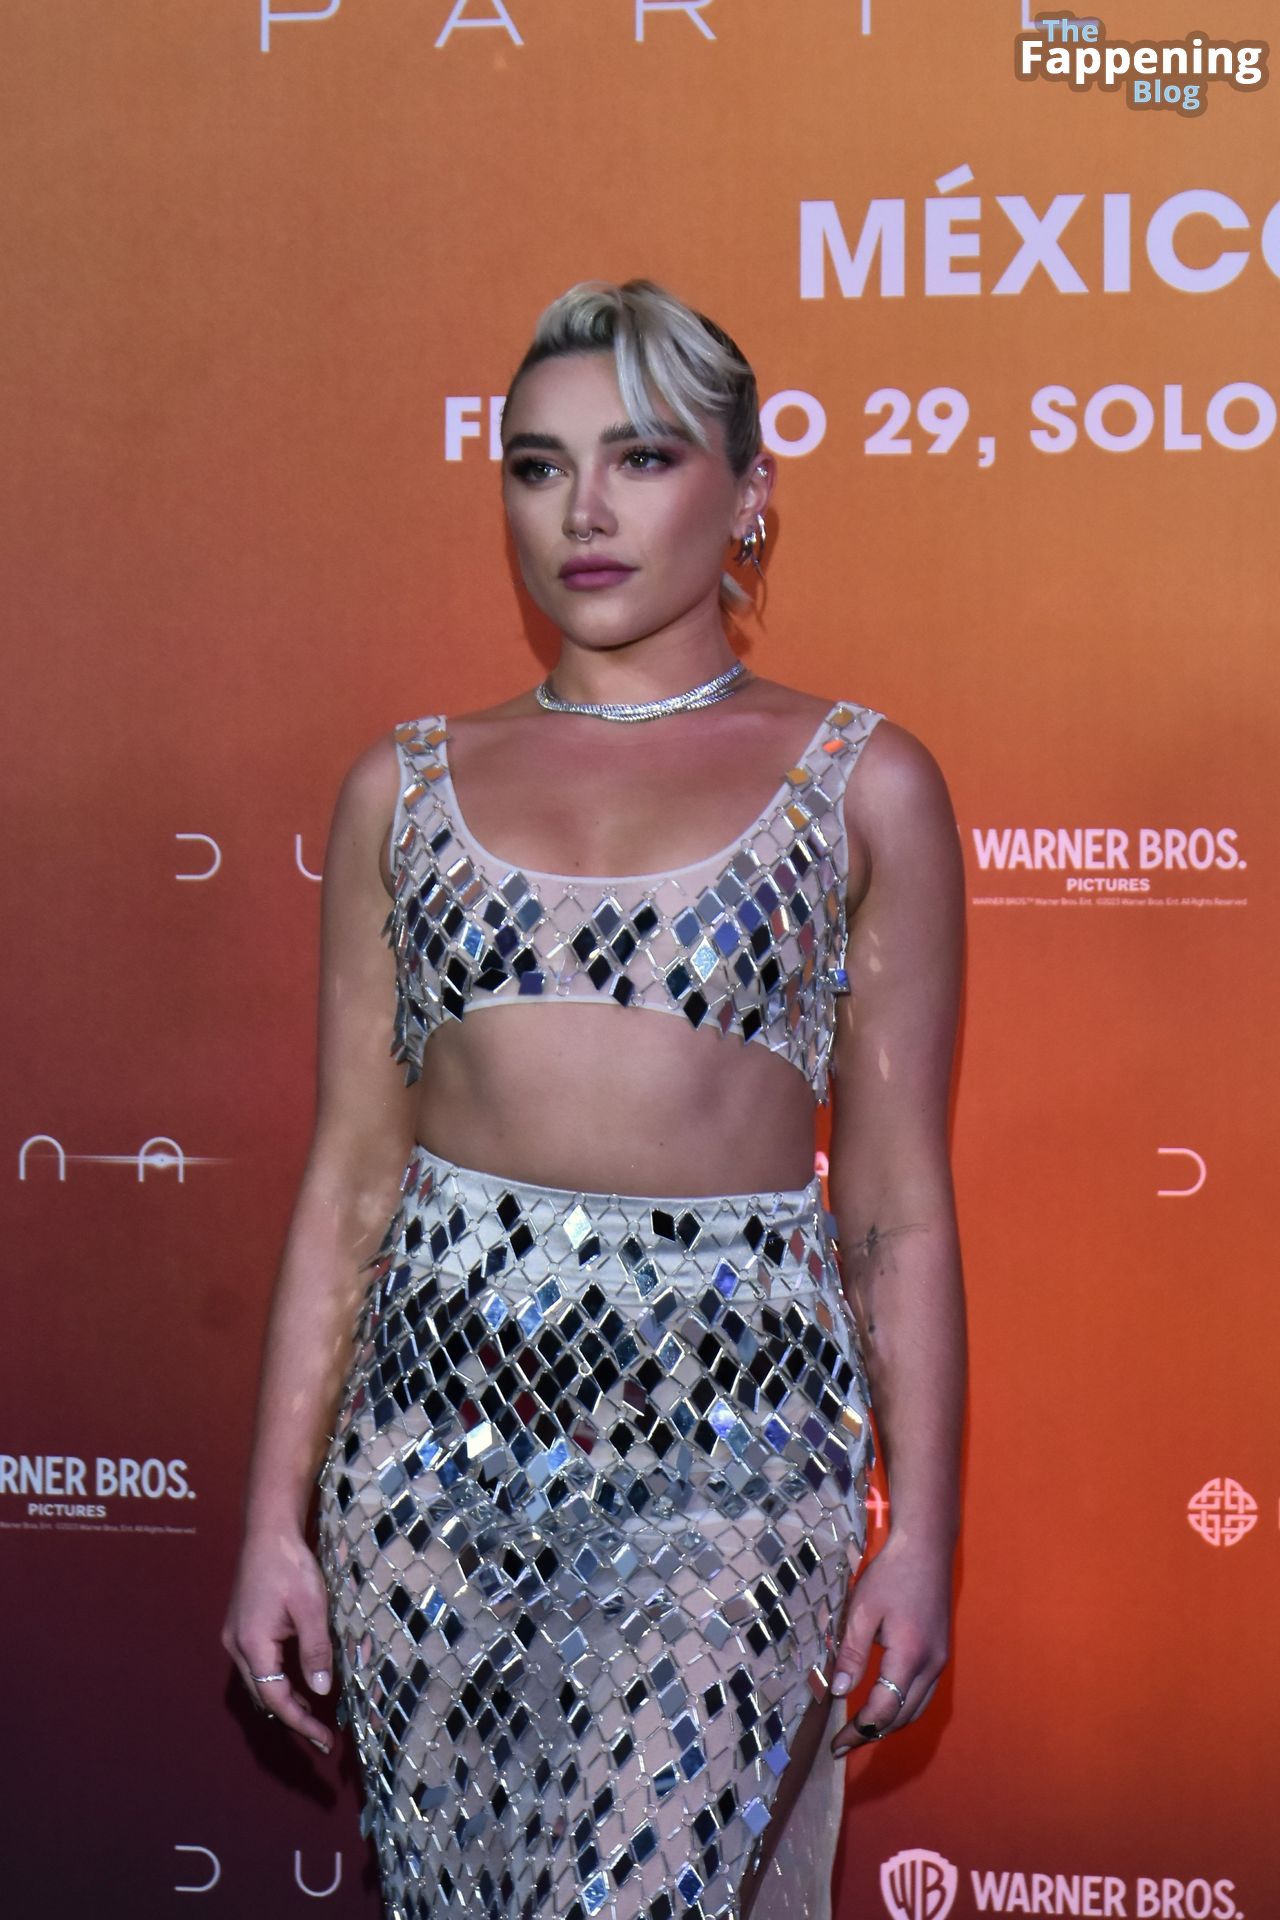 Florence-Pugh-Sexy-42-The-Fappening-Blog.jpg